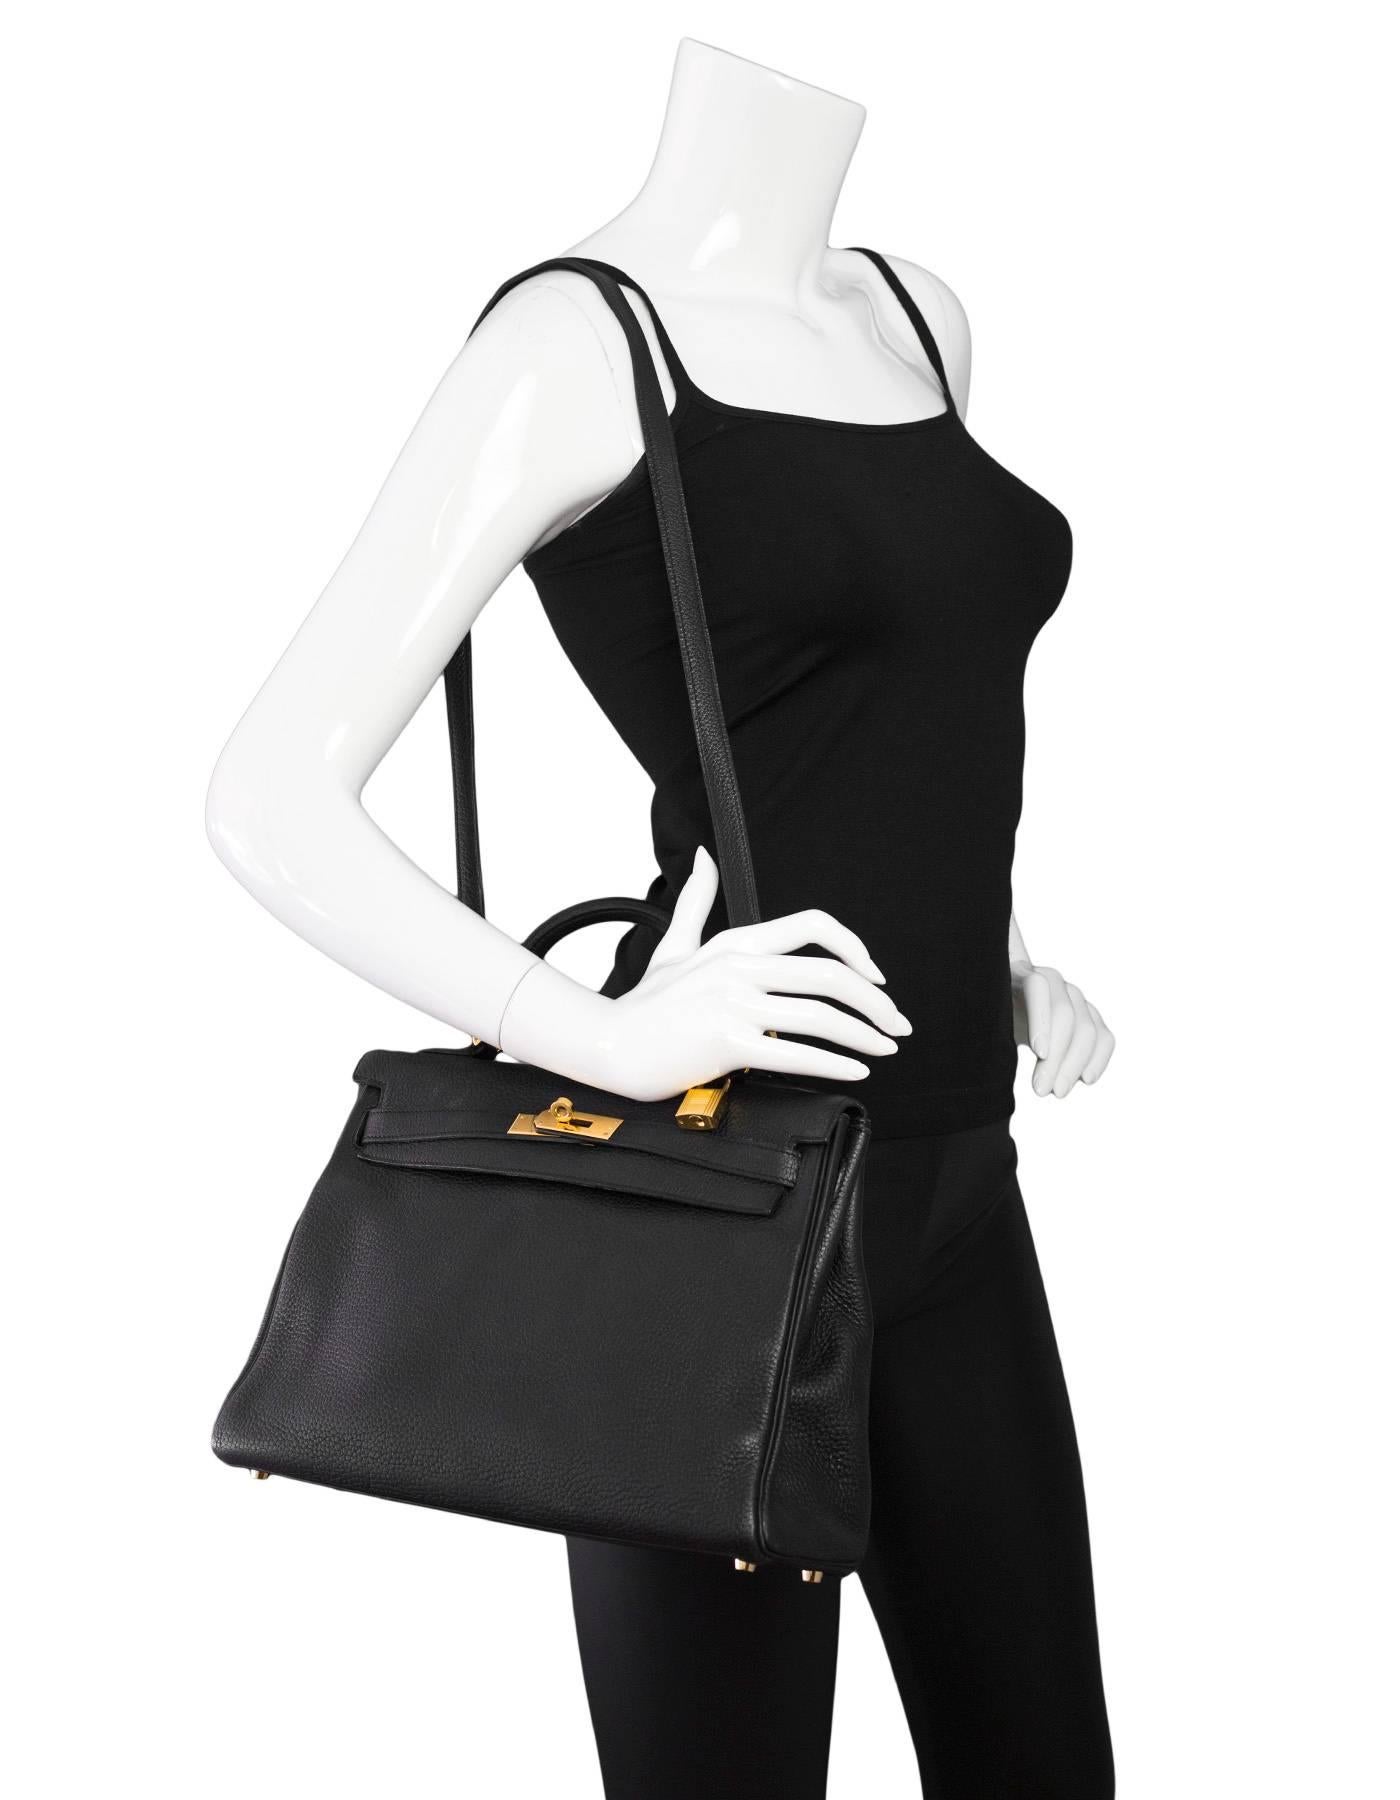 Hermes Black Togo 32cm Kelly Retourne Bag 
Features removable shoulder/crossbody strap

Made In: France
Year of Production: 2007
Color: Black
Hardware: Goldtone
Materials: Togo leather, metal
Lining: Black leather
Closure/opening: Flap top with two